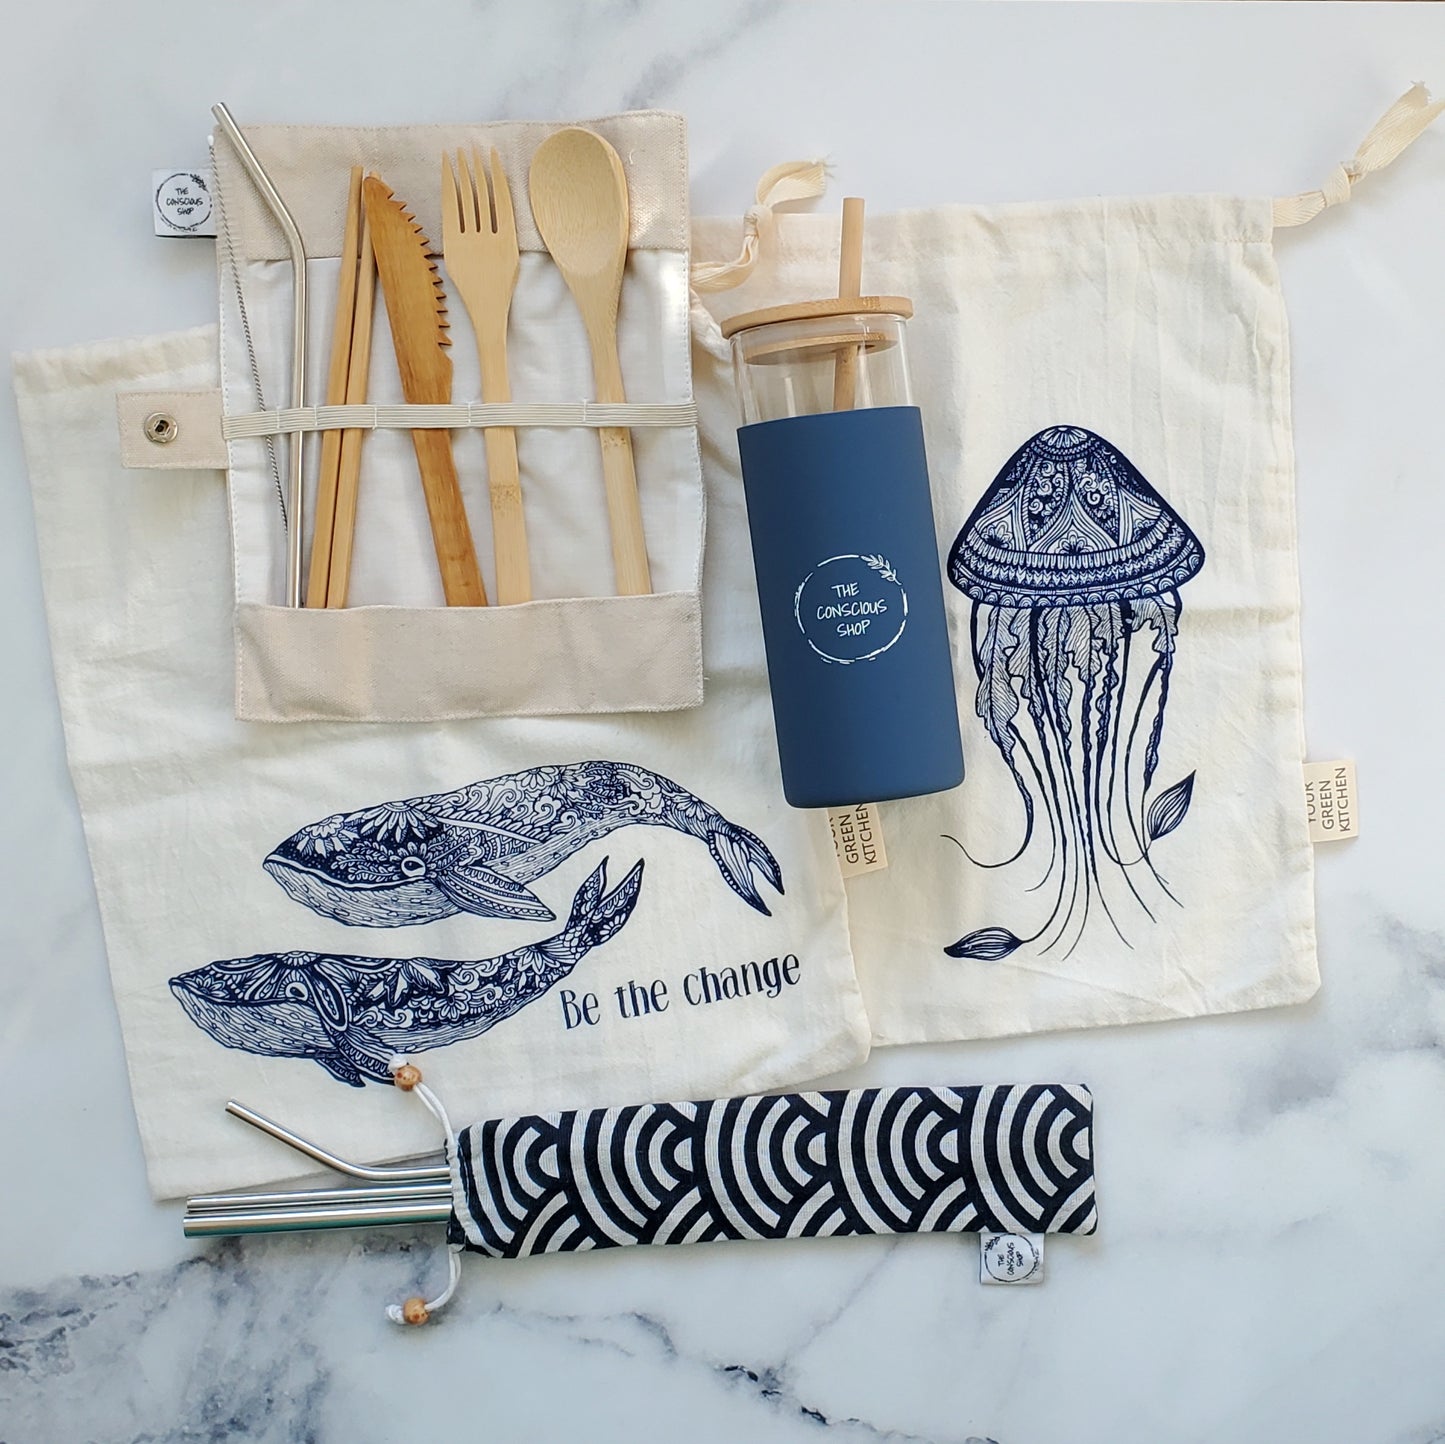 Eco-conscious Lunch Set with Borosilicate Glass Water Bottle, Wood Cutlery Set, Stainless Steel Reusable Straws & Produce Bags